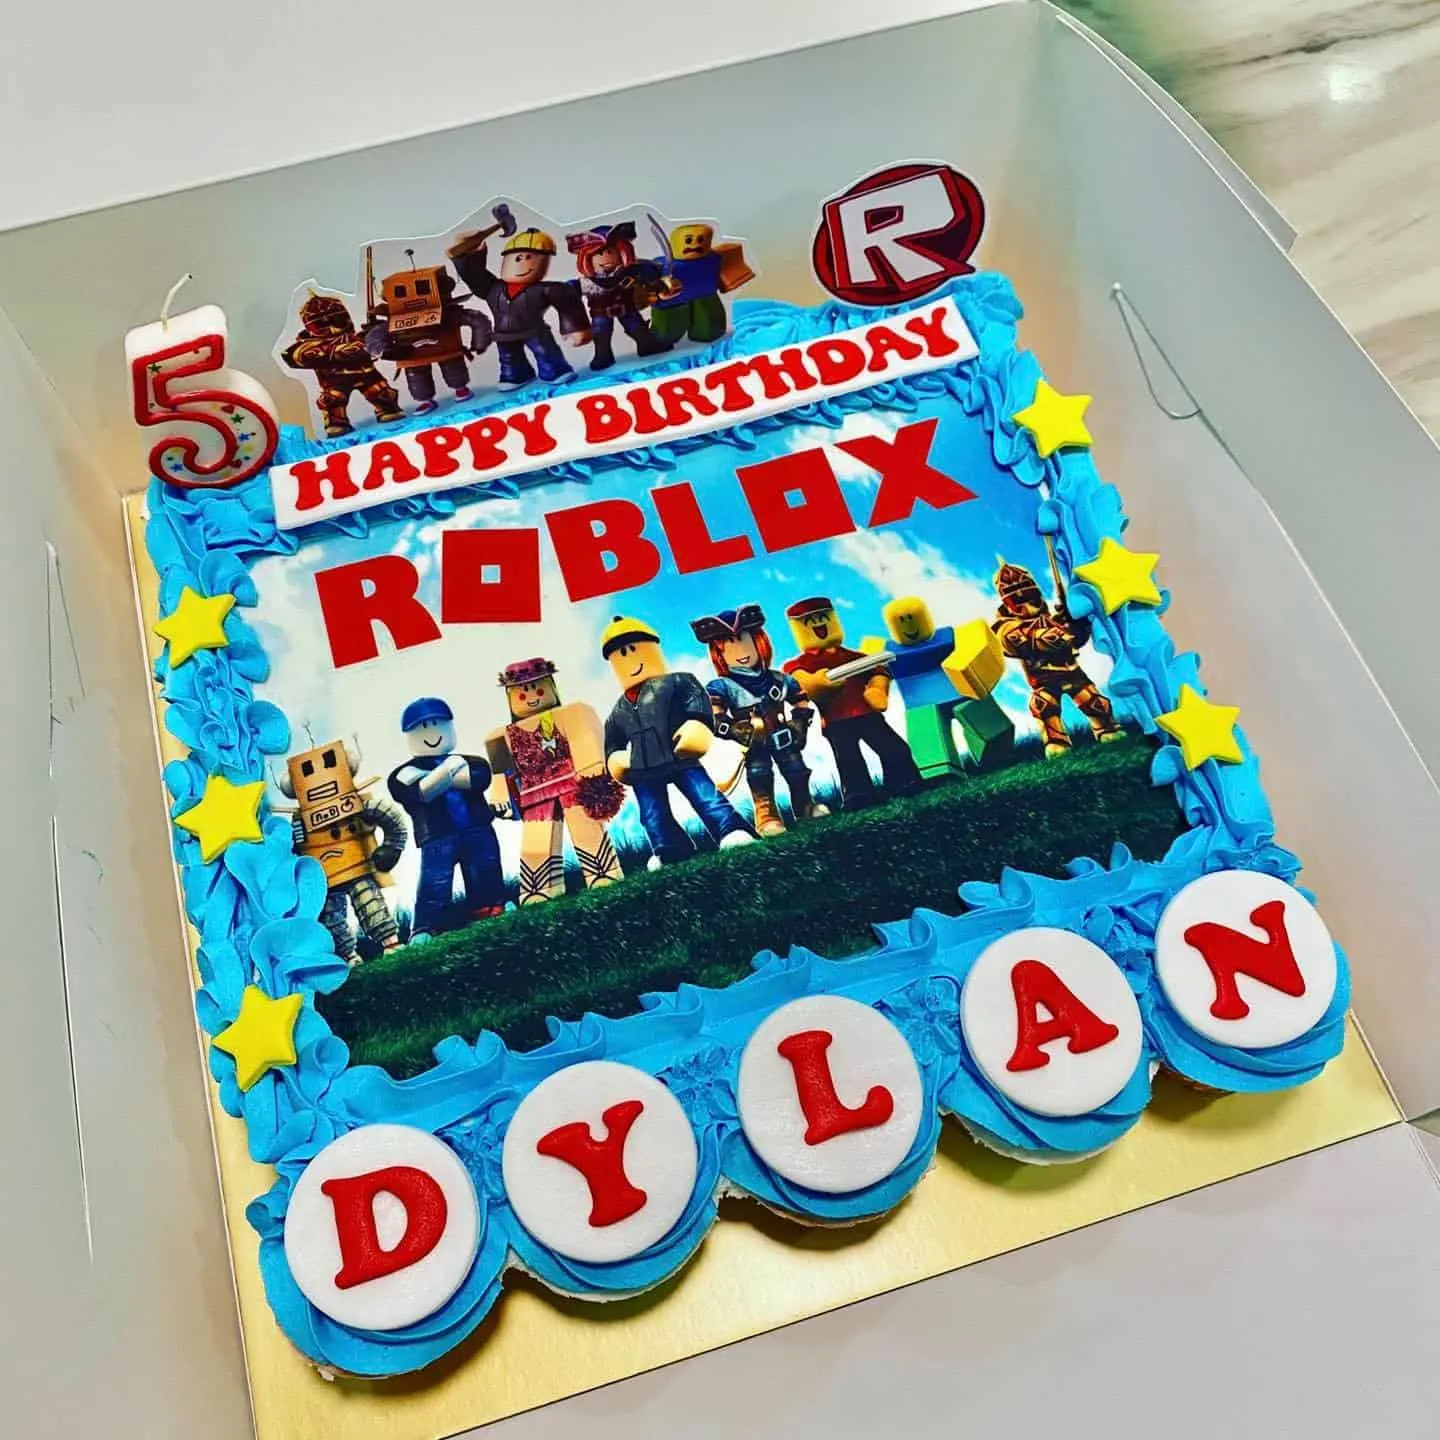 26 Roblox Cake Ideas Recipes Tutorials Tips And Supplies - images of roblox birthday cakes